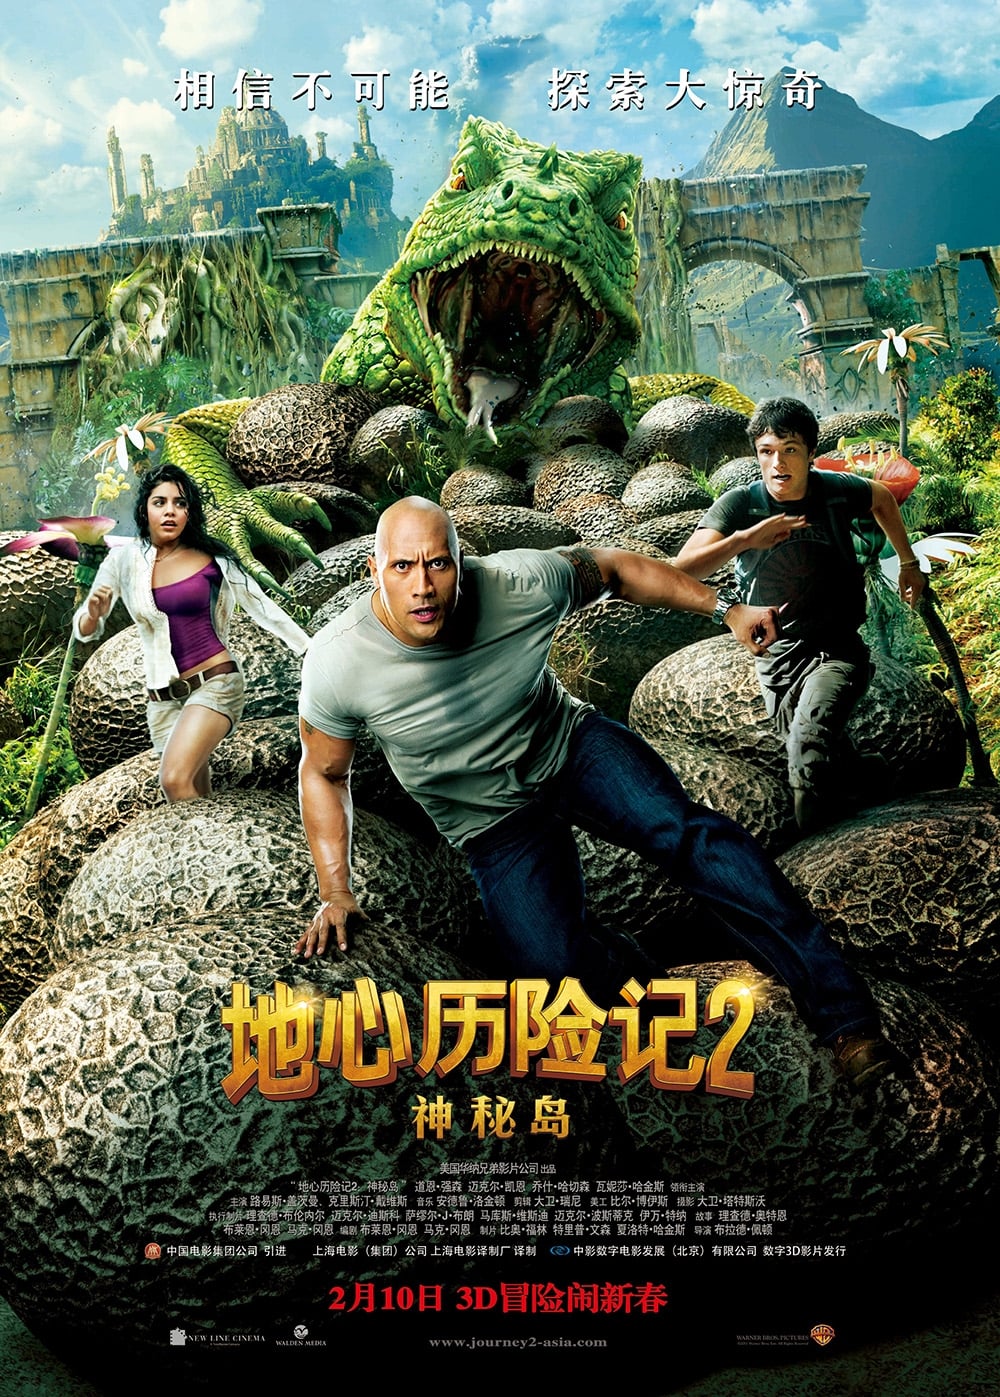 Journey 2 The Mysterious Island Full Movie Free Watch Journey 2: The Mysterious Island (2012) Full Movie Online Free